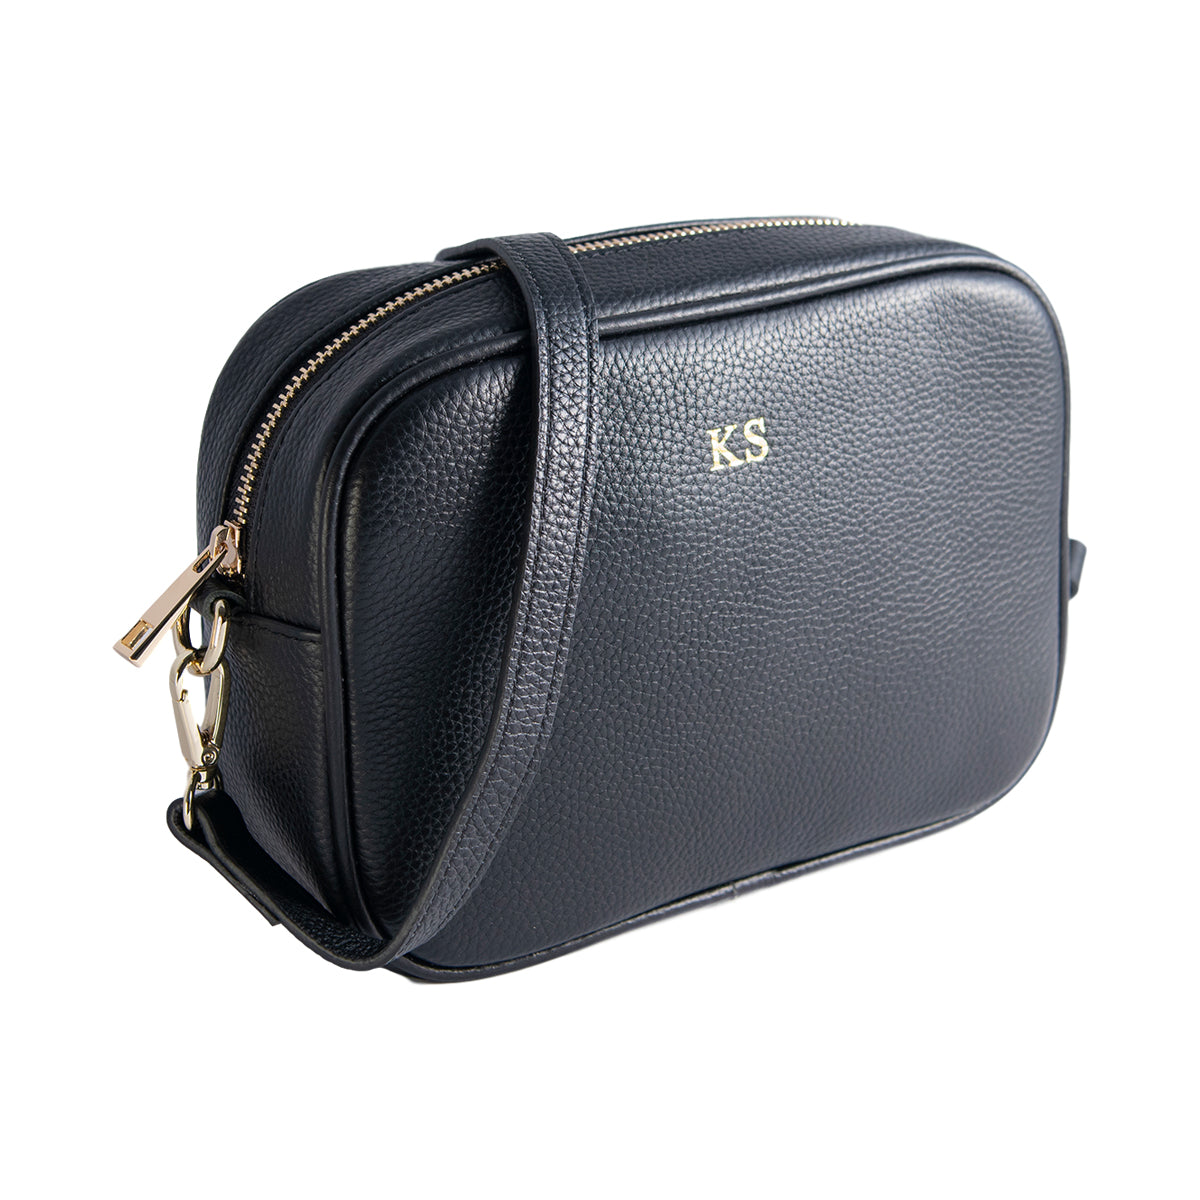 Personalised Black Cross Body Bag with Gold Trim Strap